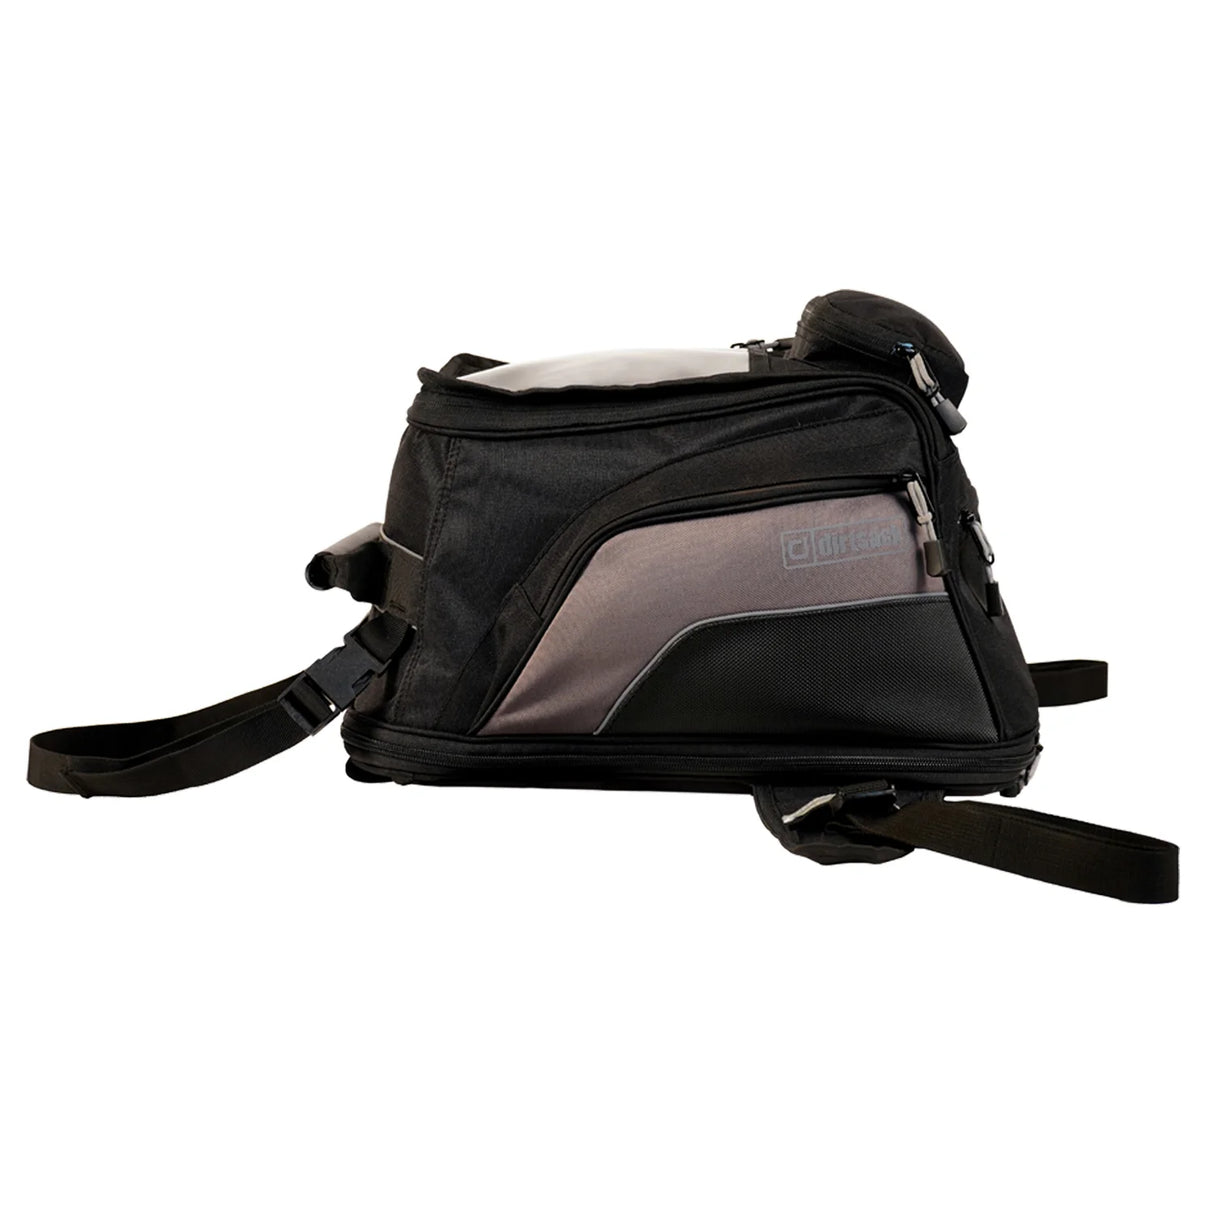 DIRTSACK FORESTER XL TANK BAG